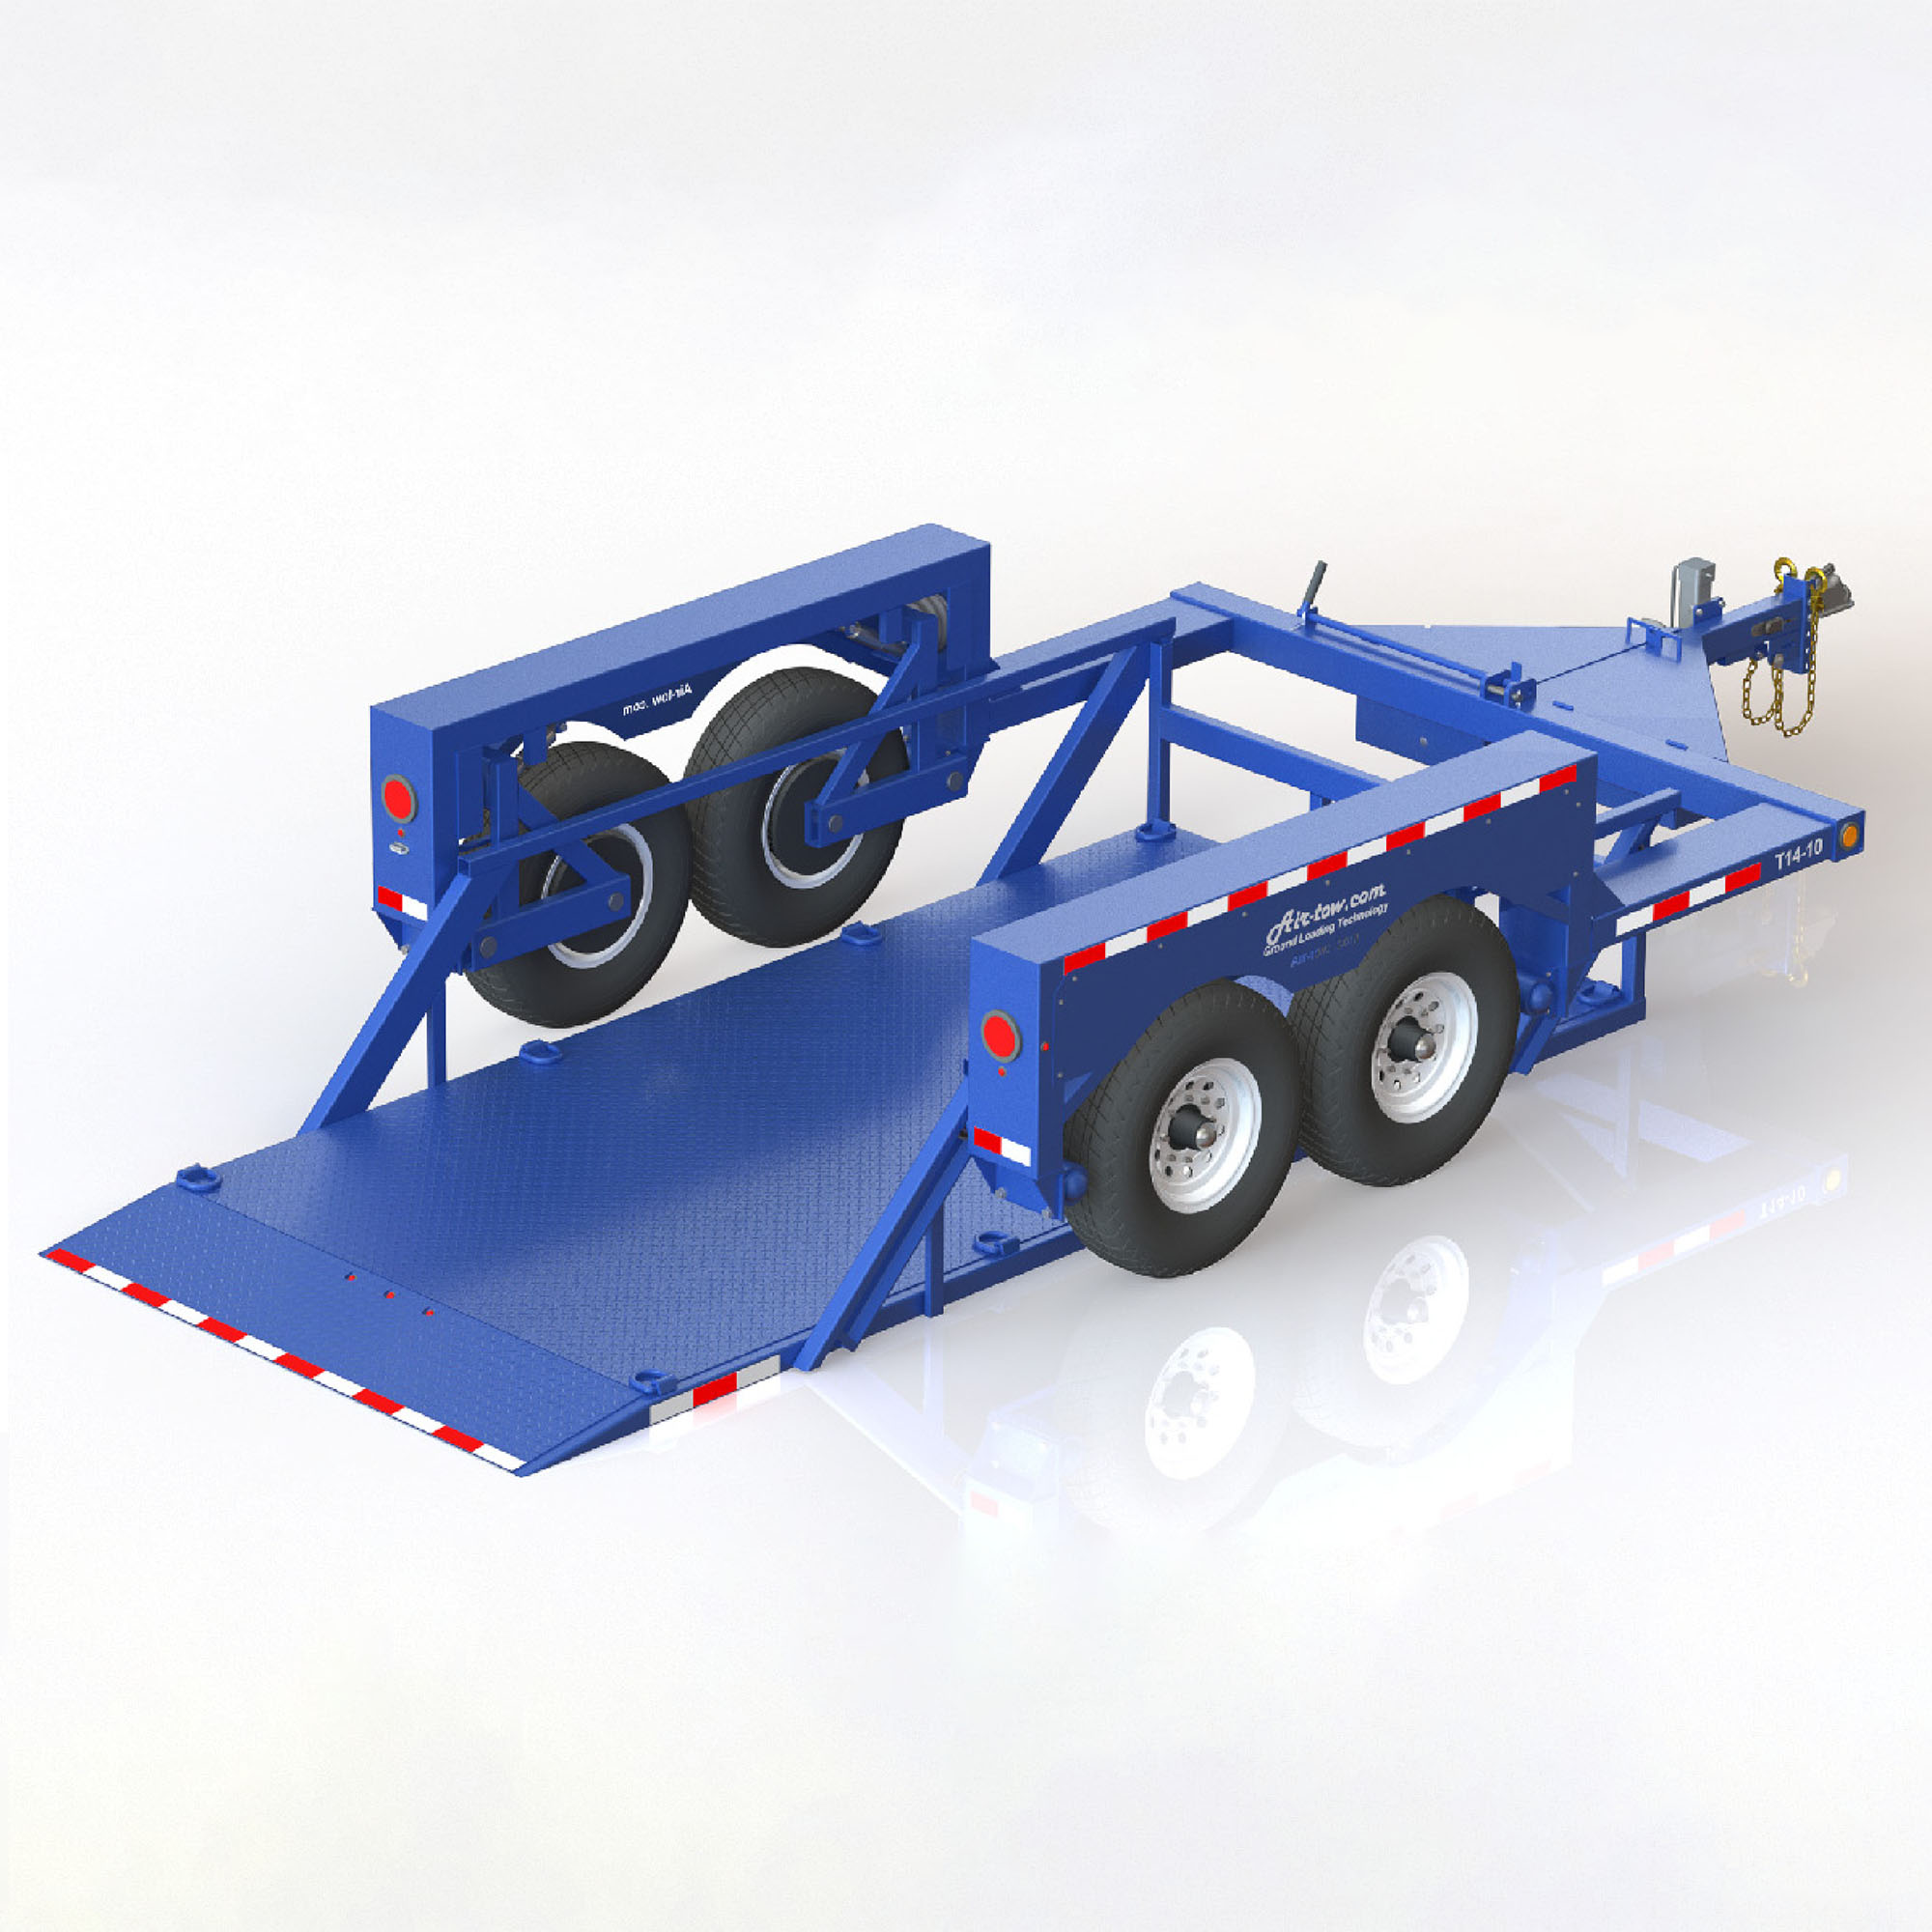 Air-Tow T14-10 Tandem Axle Flatbed Trailer